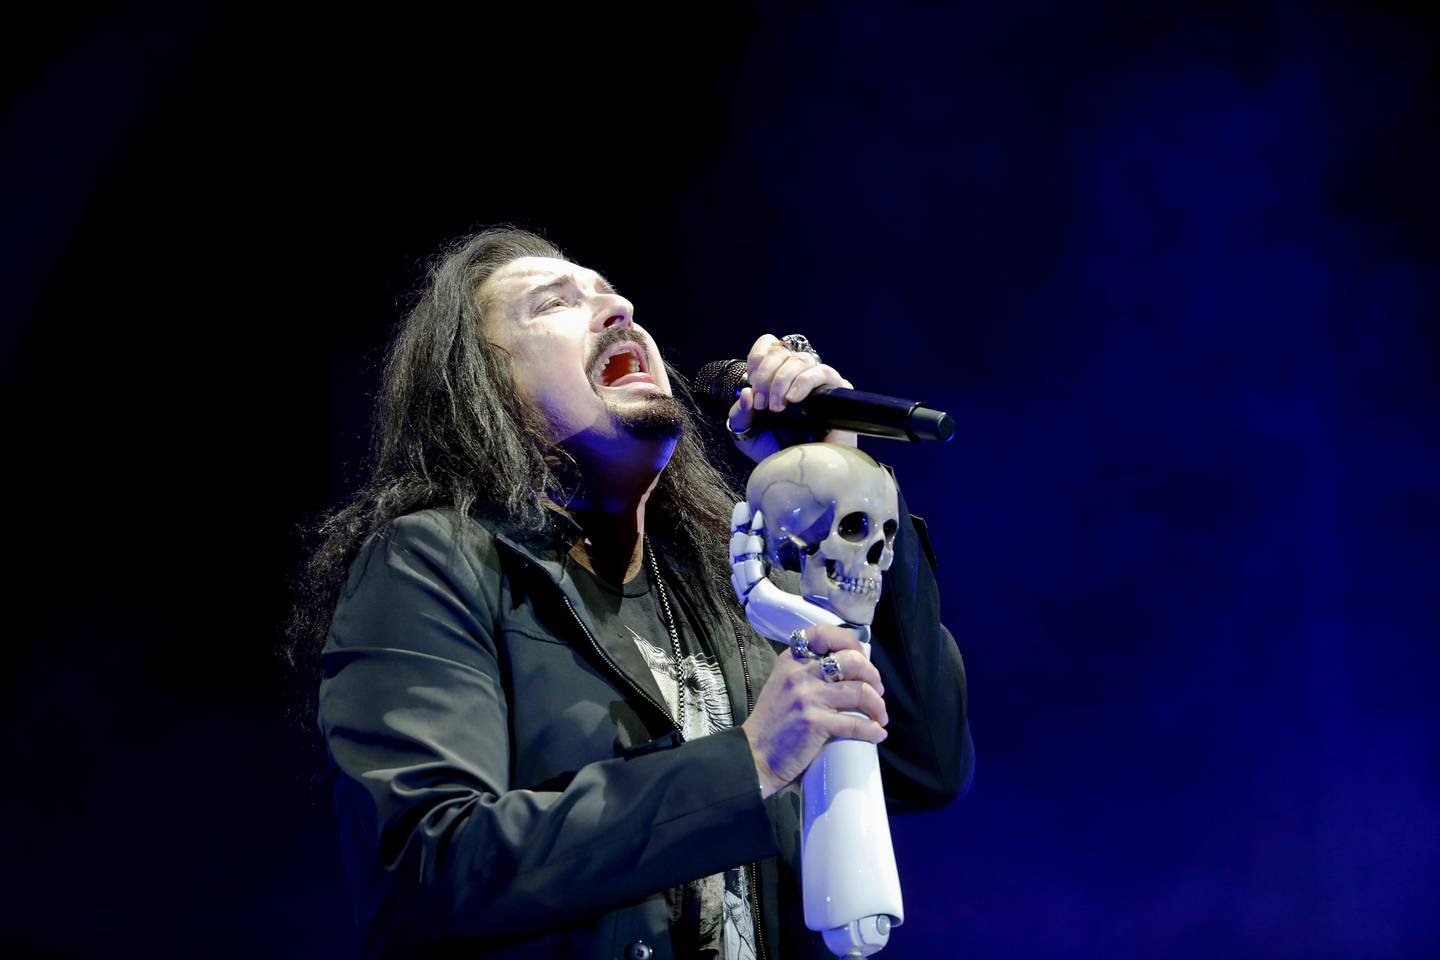 James LaBrie of American progressive metal Dream Theater performs at the Domination Music Festival in Mexico City, Saturday, May 4, 2019. (AP Photo/Eduardo Verdugo)